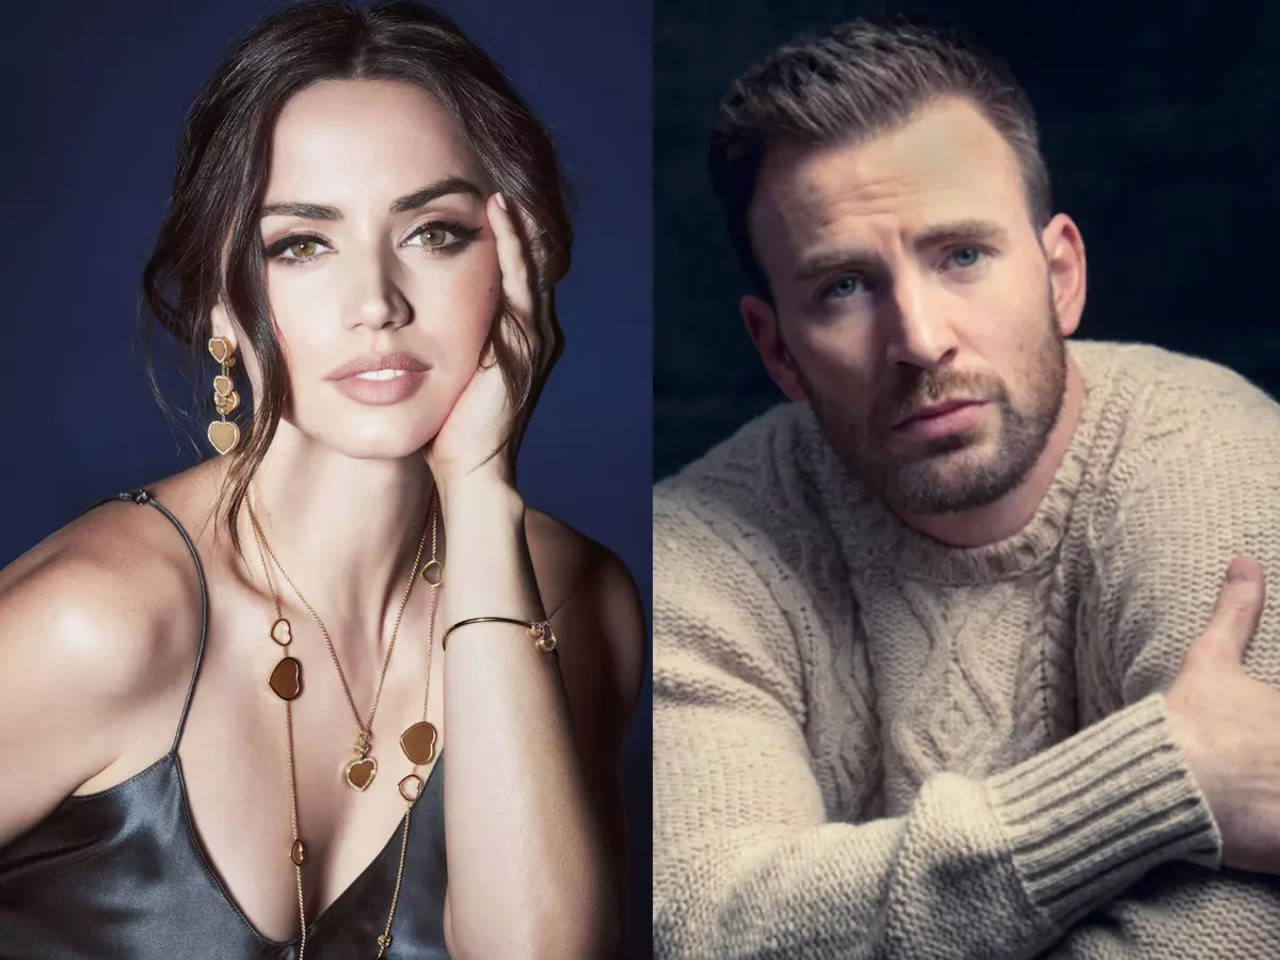 Ghosted': What to Know About Chris Evans, Ana de Armas' New Movie